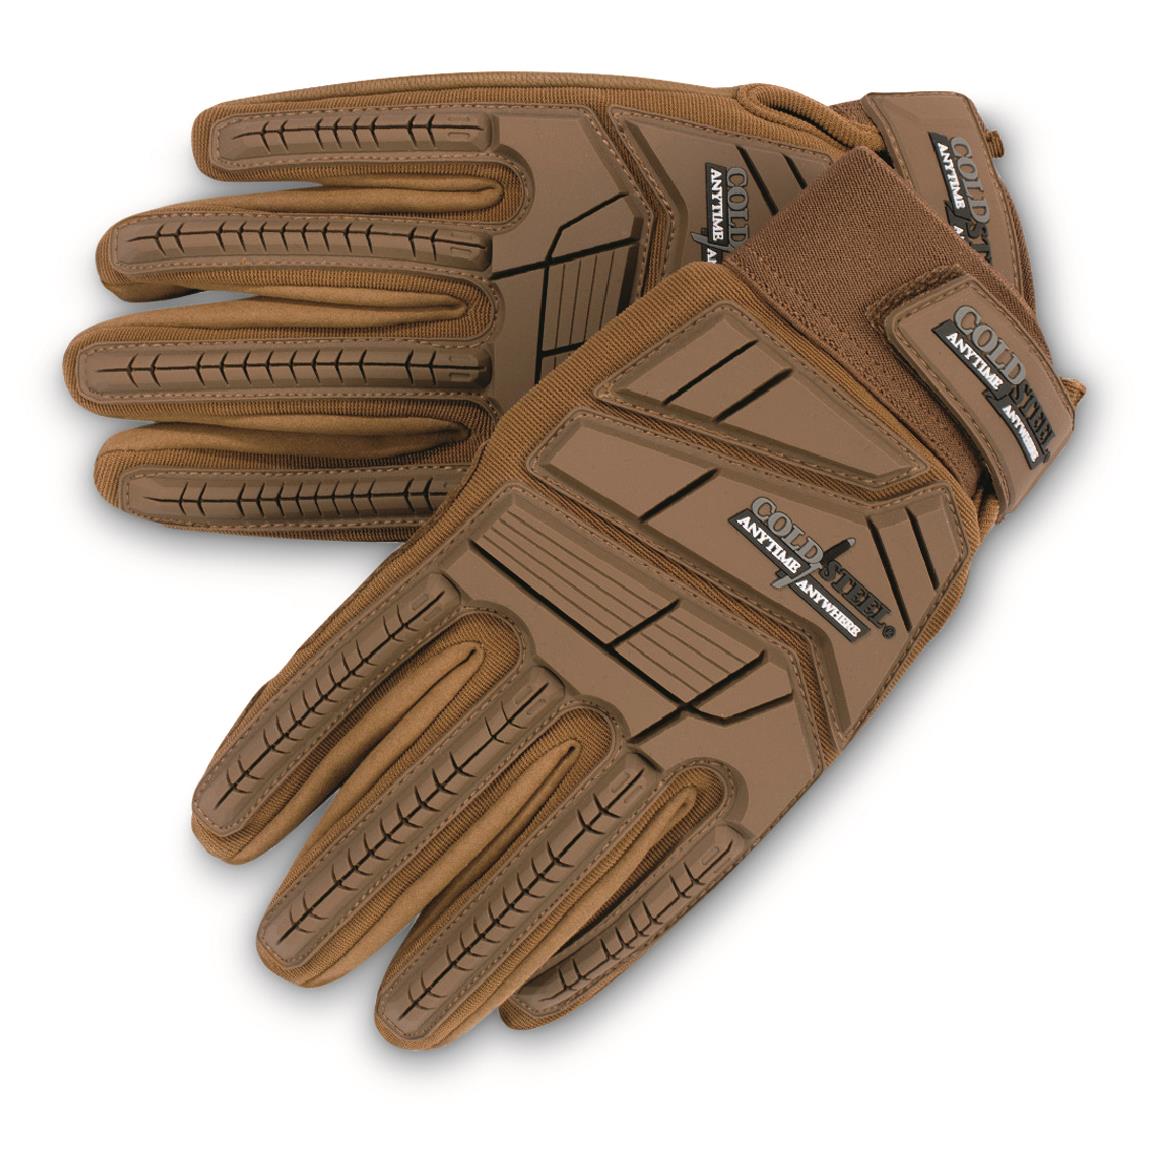 Cold Steel Leather TPR Cut Resistant Tactical Gloves, Tan